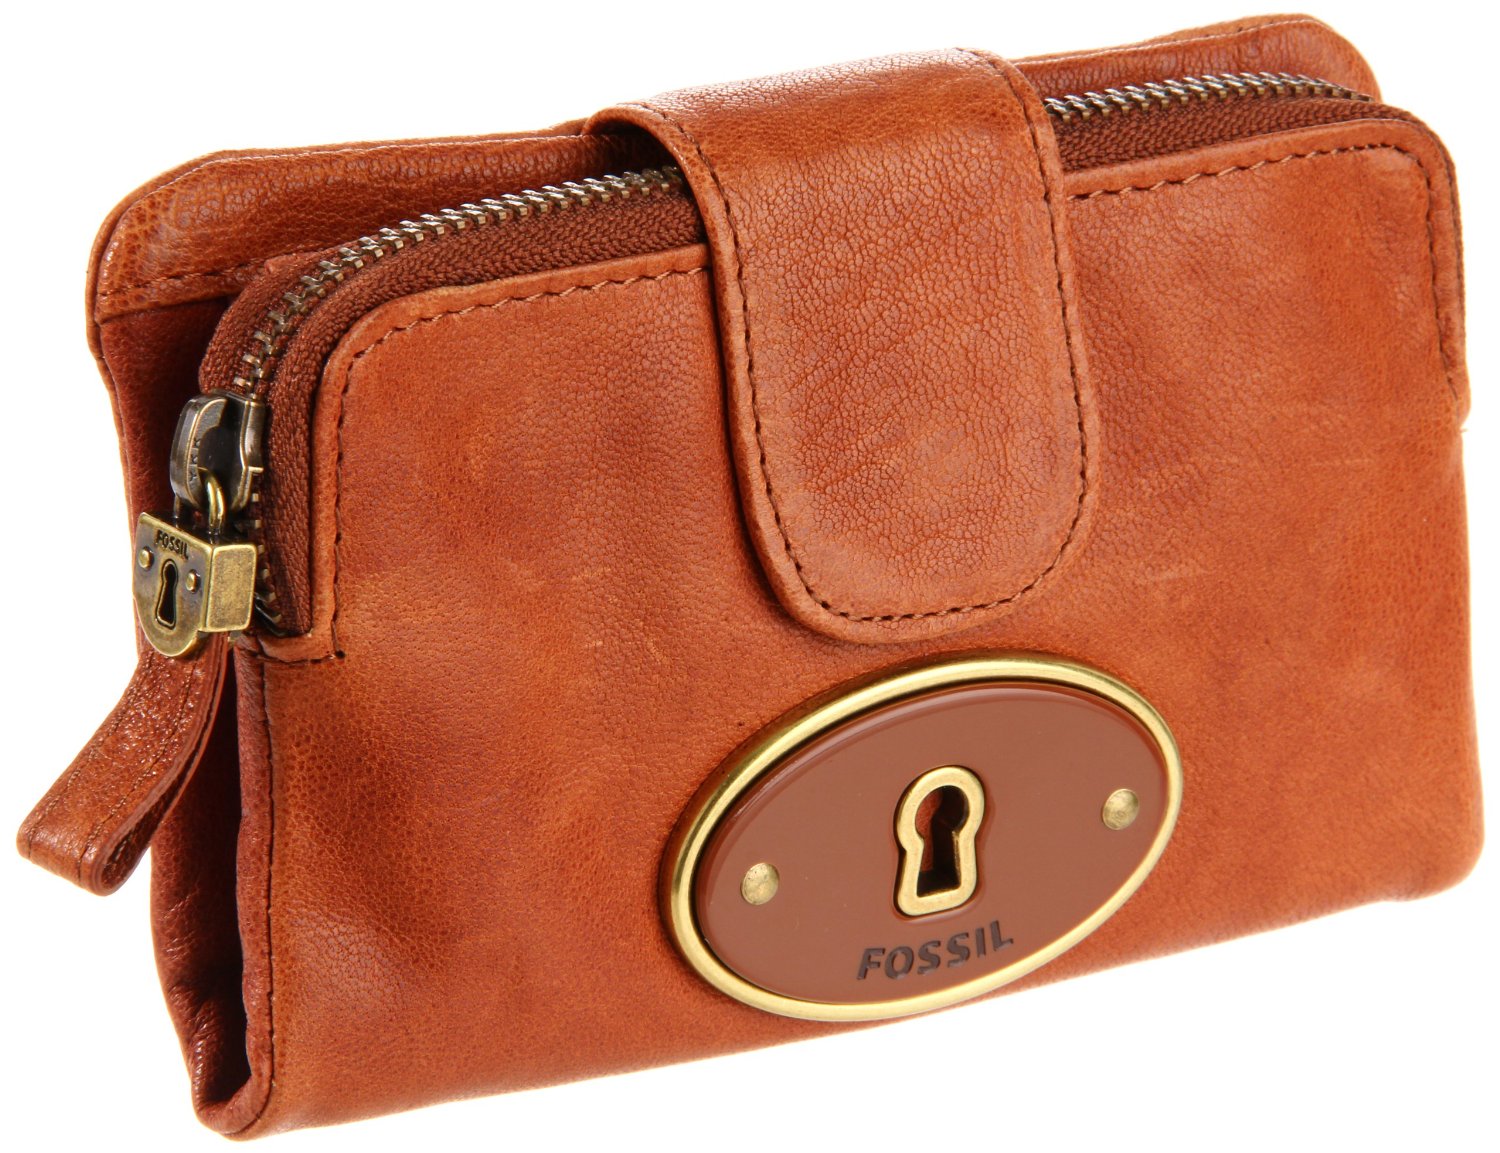 Fossil Women&#39;s Wallets On Sale At Amazon | Jaguar Clubs of North America